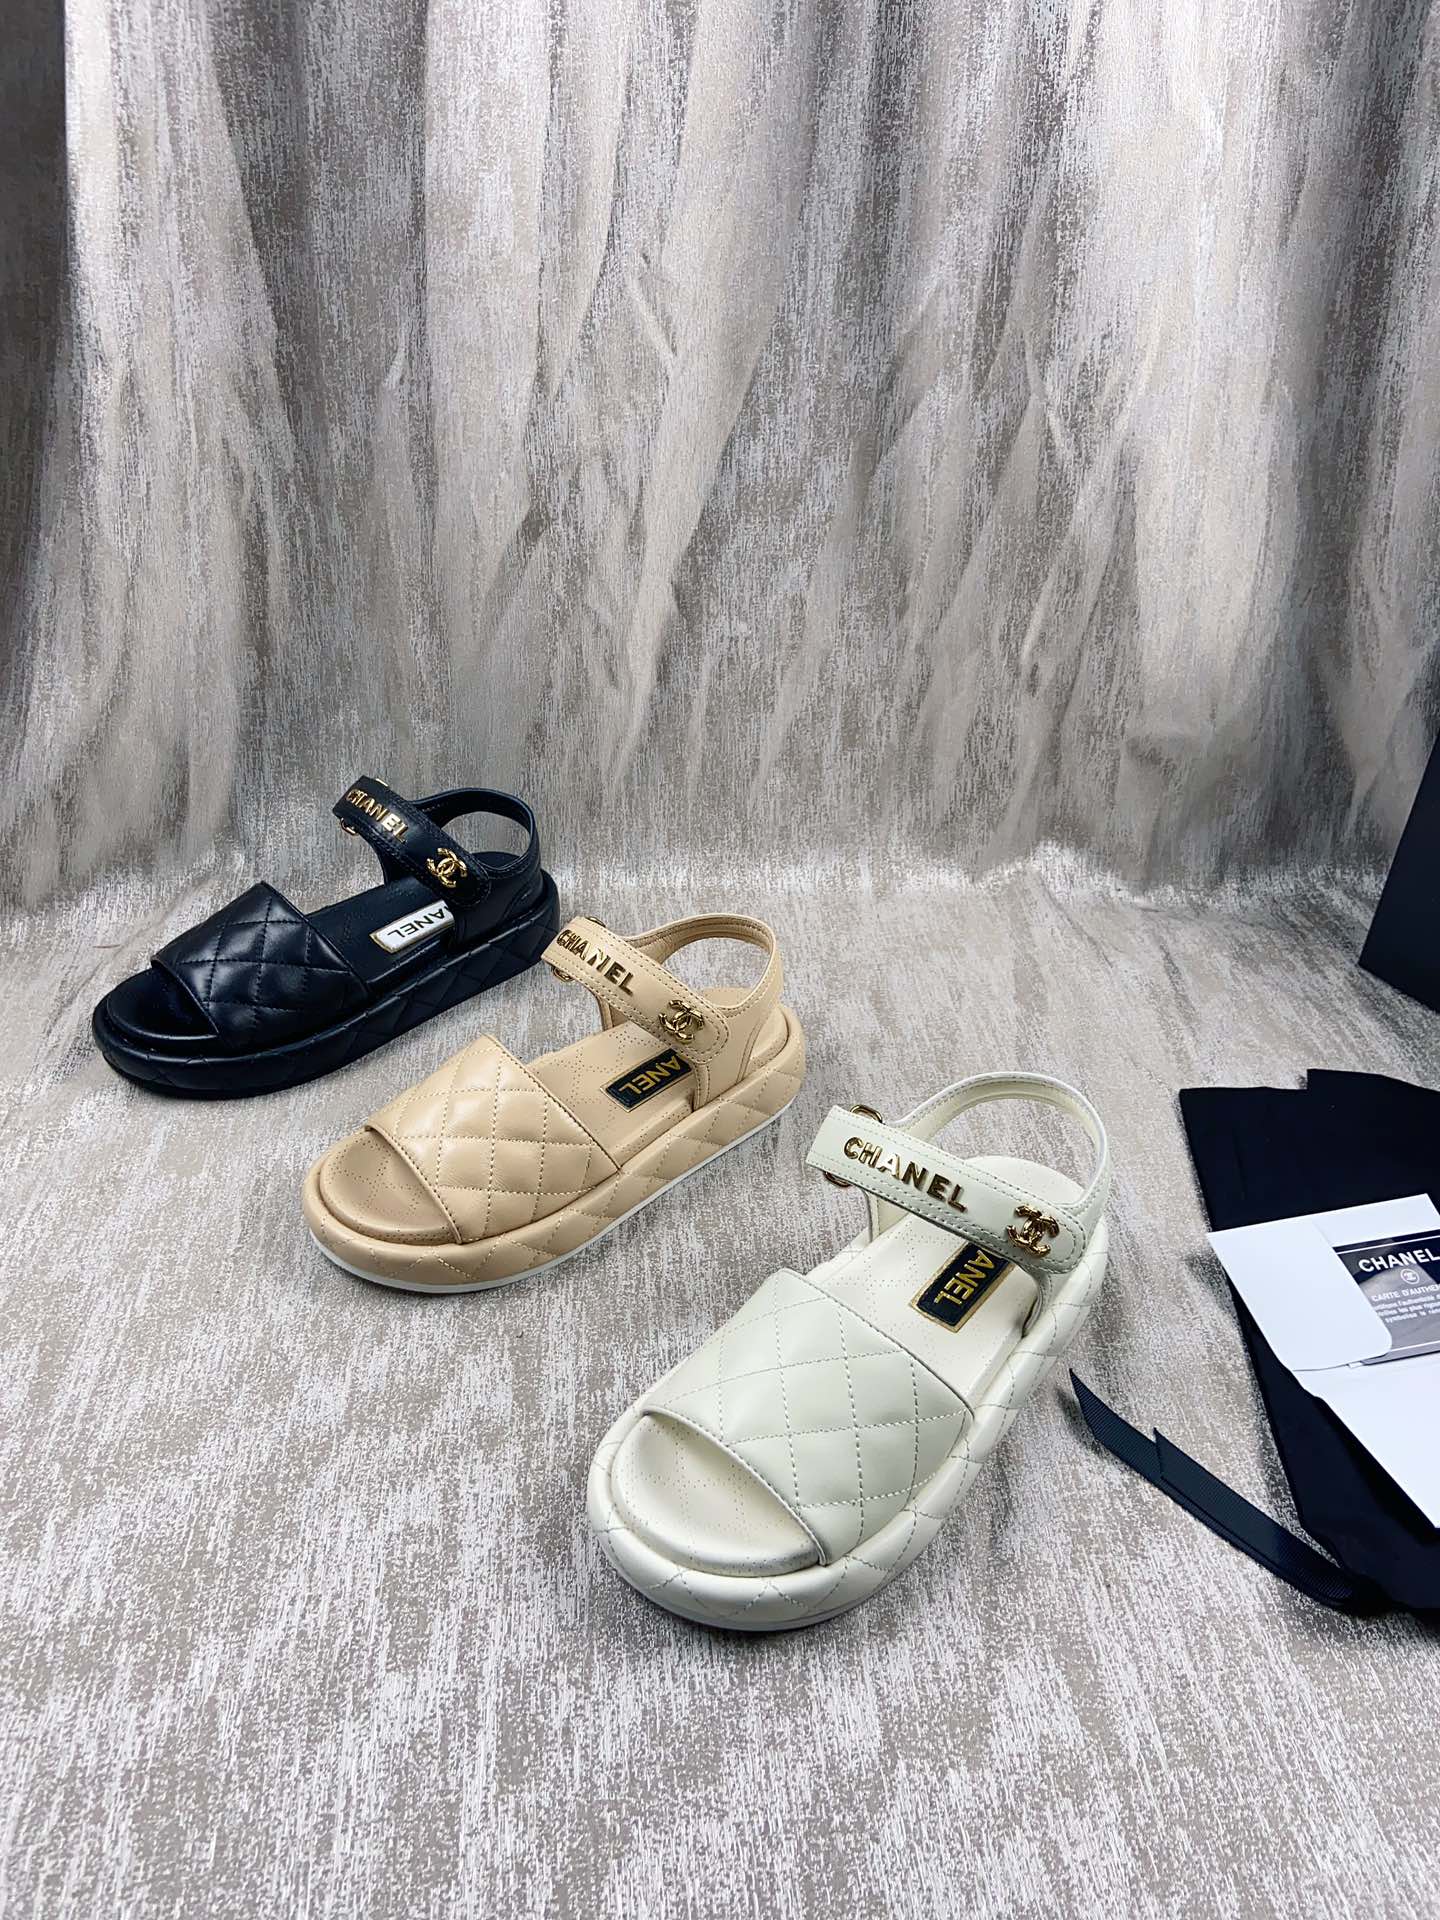 Chanel AAAAA
 Shoes Loafers Sandals Slippers Gold Hardware Cowhide Sheepskin Spring Collection Vintage